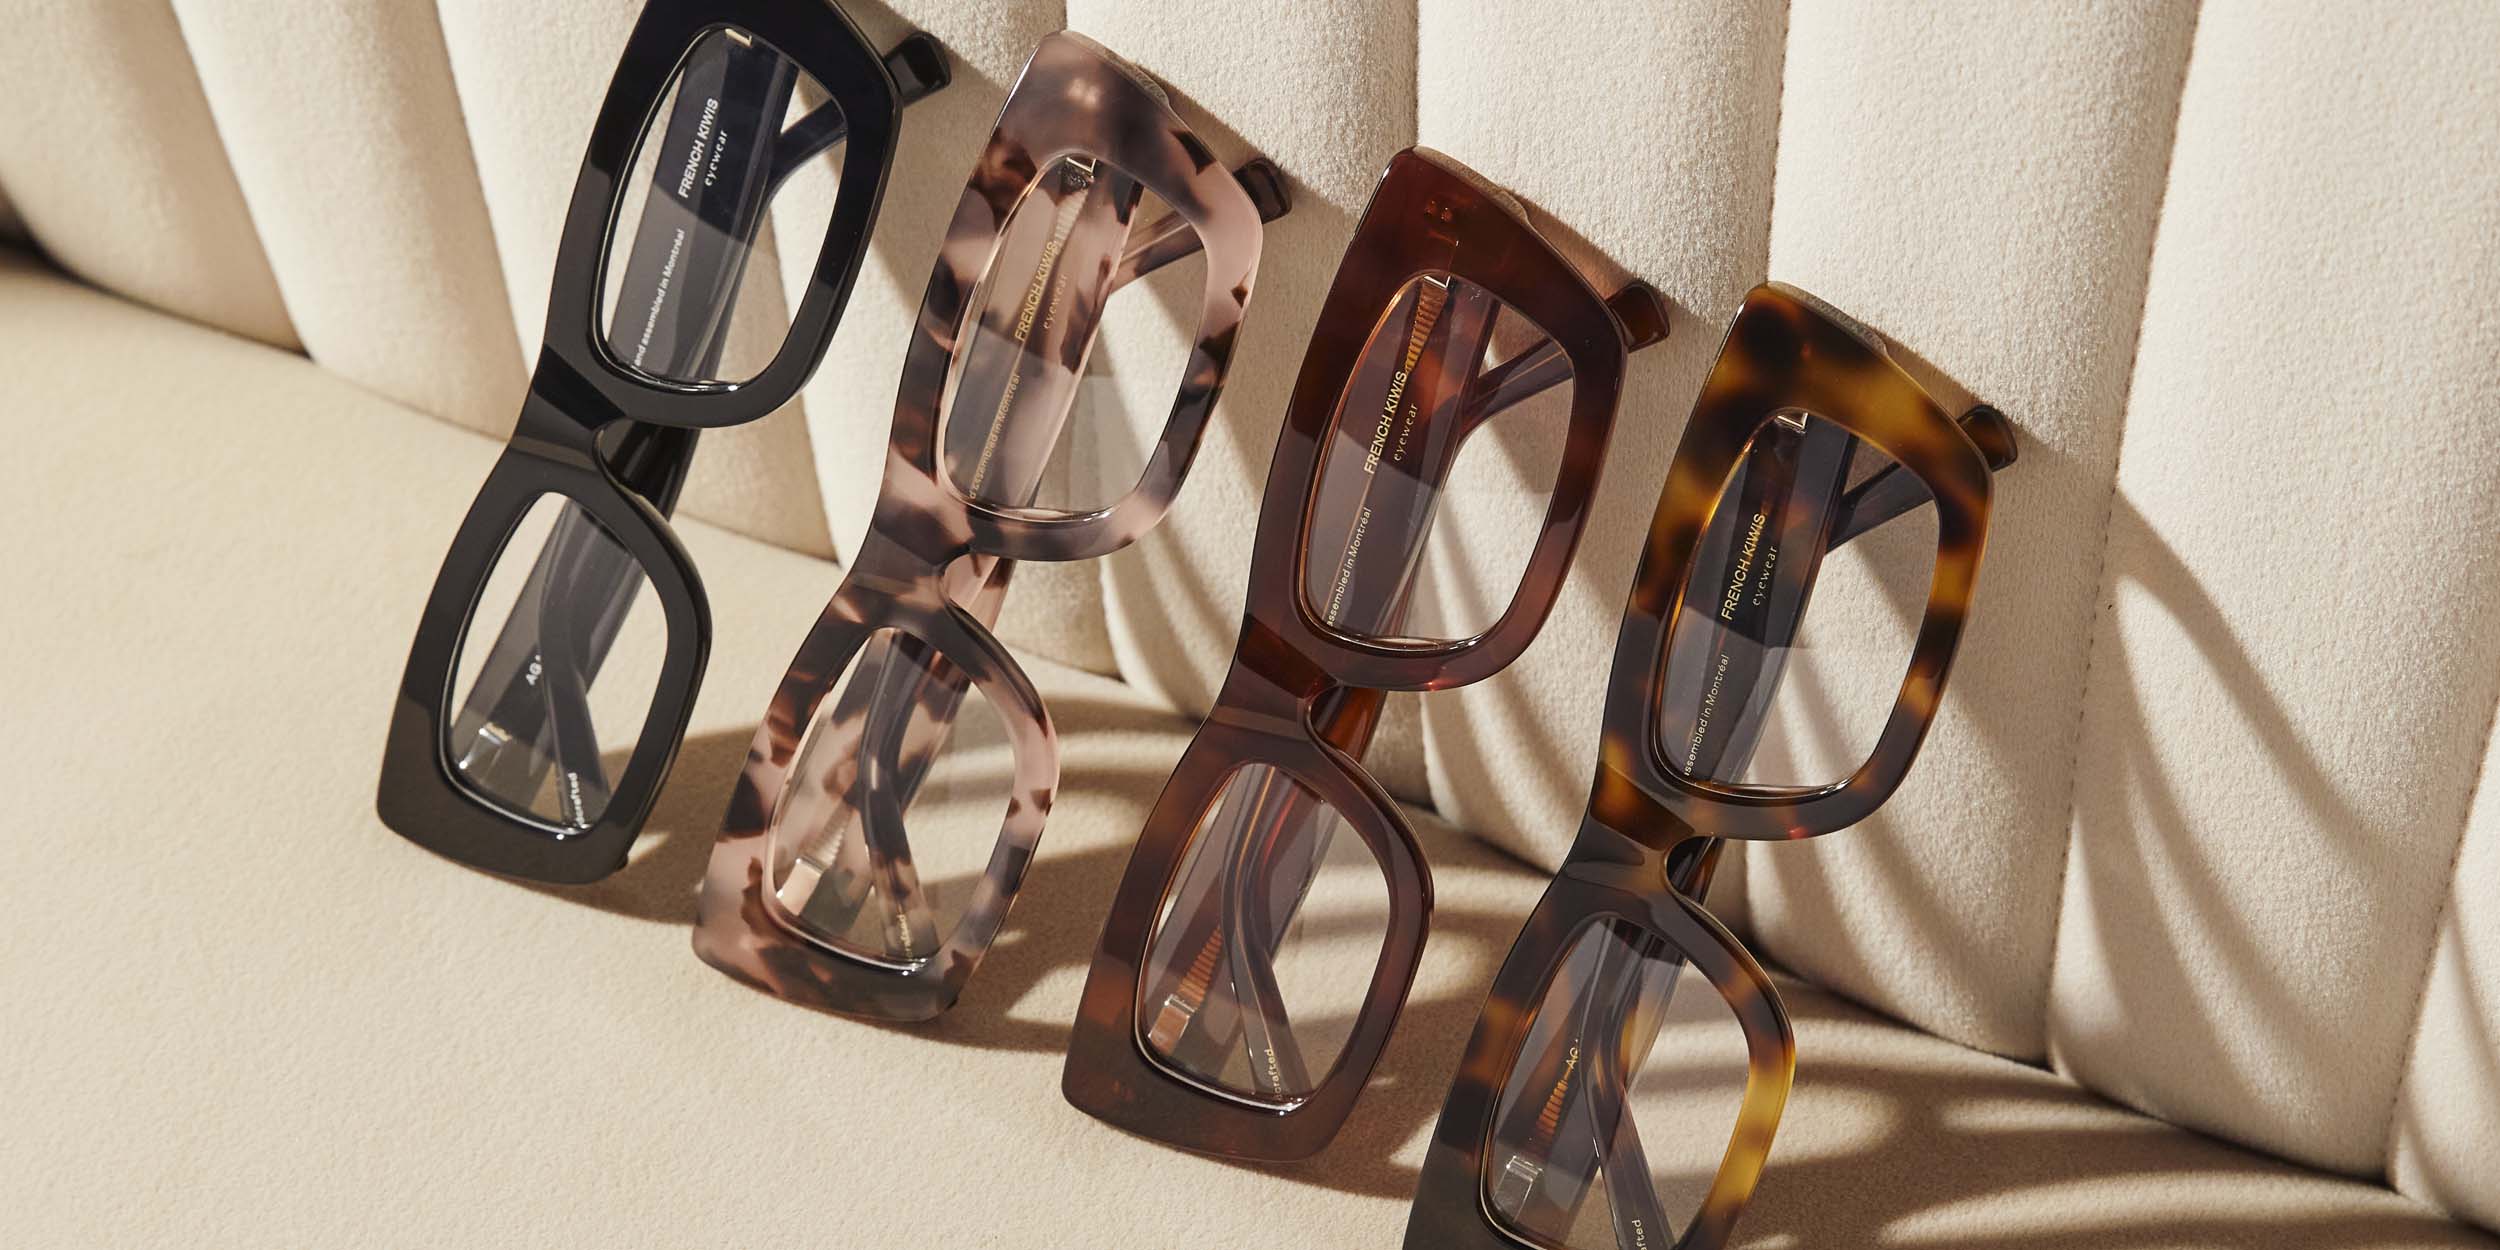 Photo Details of Agathe Tortoise Reading Glasses in a room